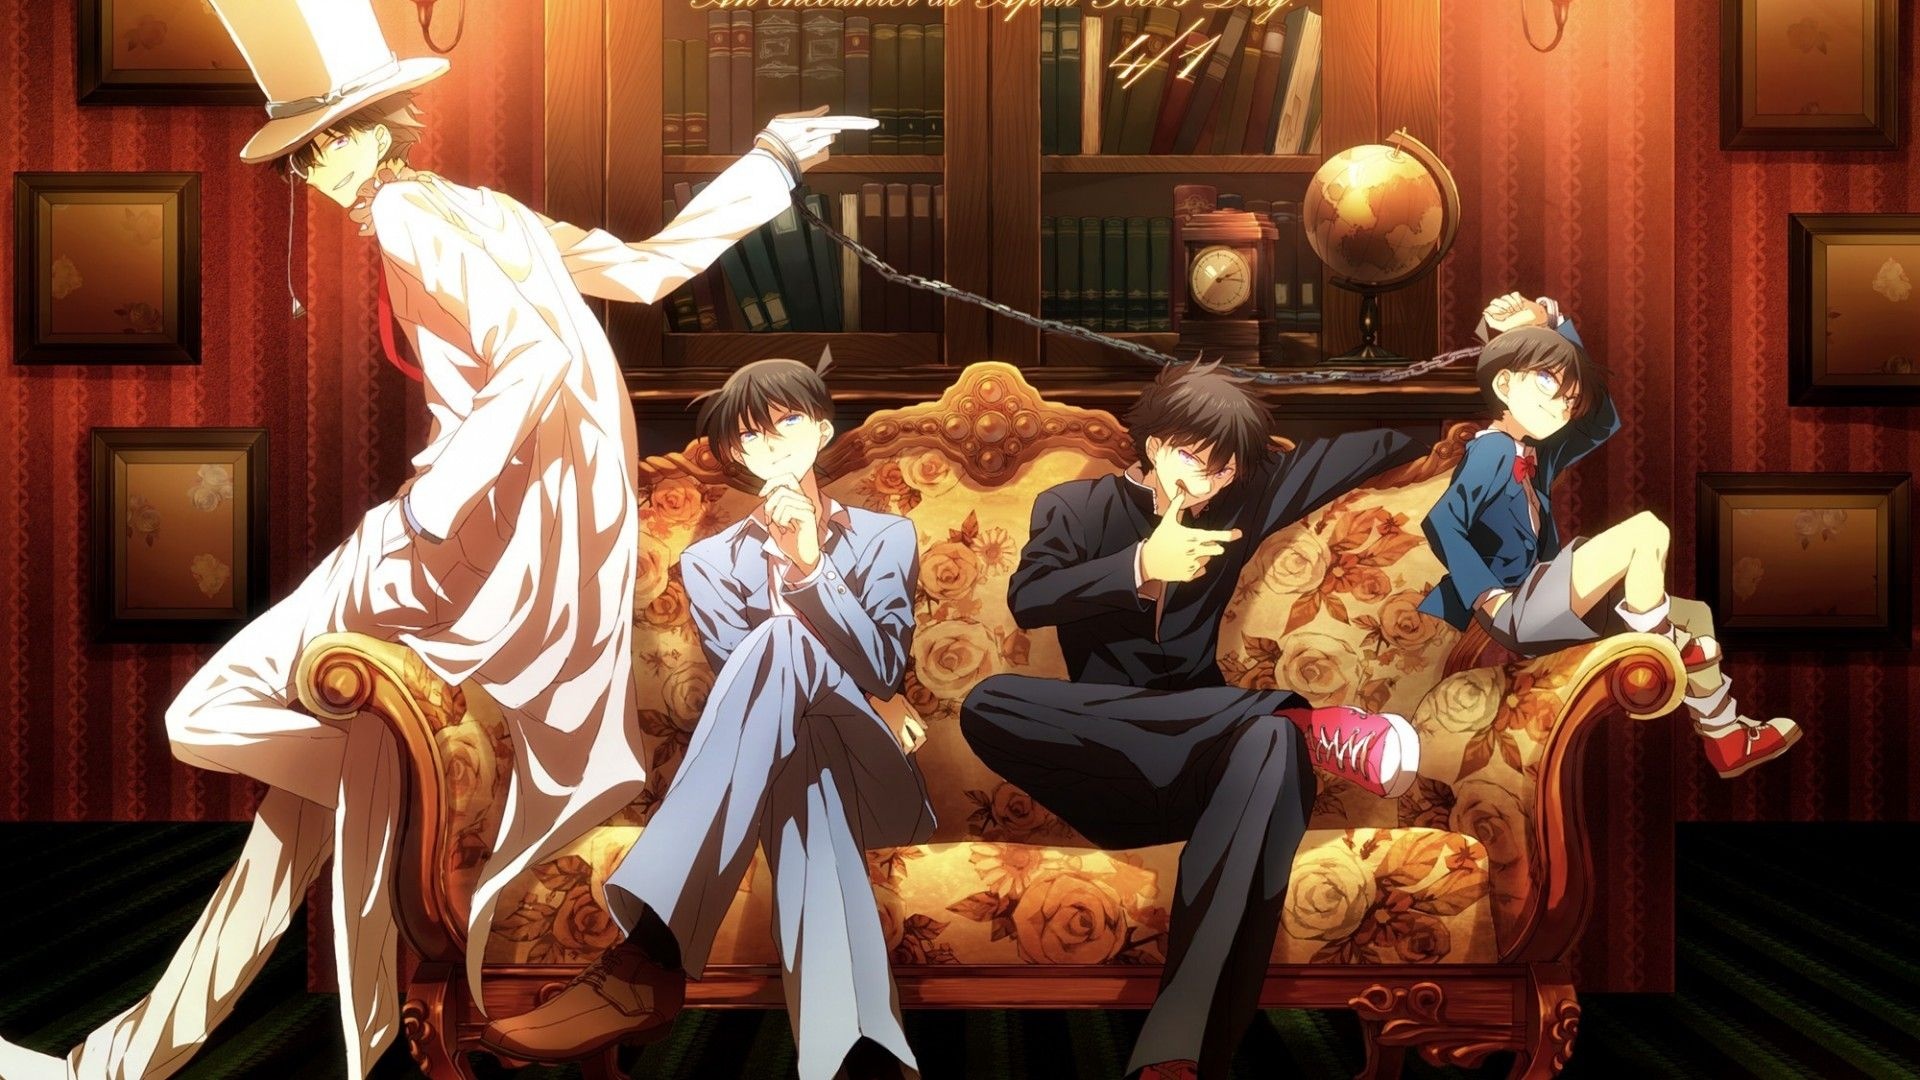 Magic Kaito anime, Cozy couch time, Detective Conan wallpapers, Anime fan cozy vibes, 1920x1080 Full HD Desktop